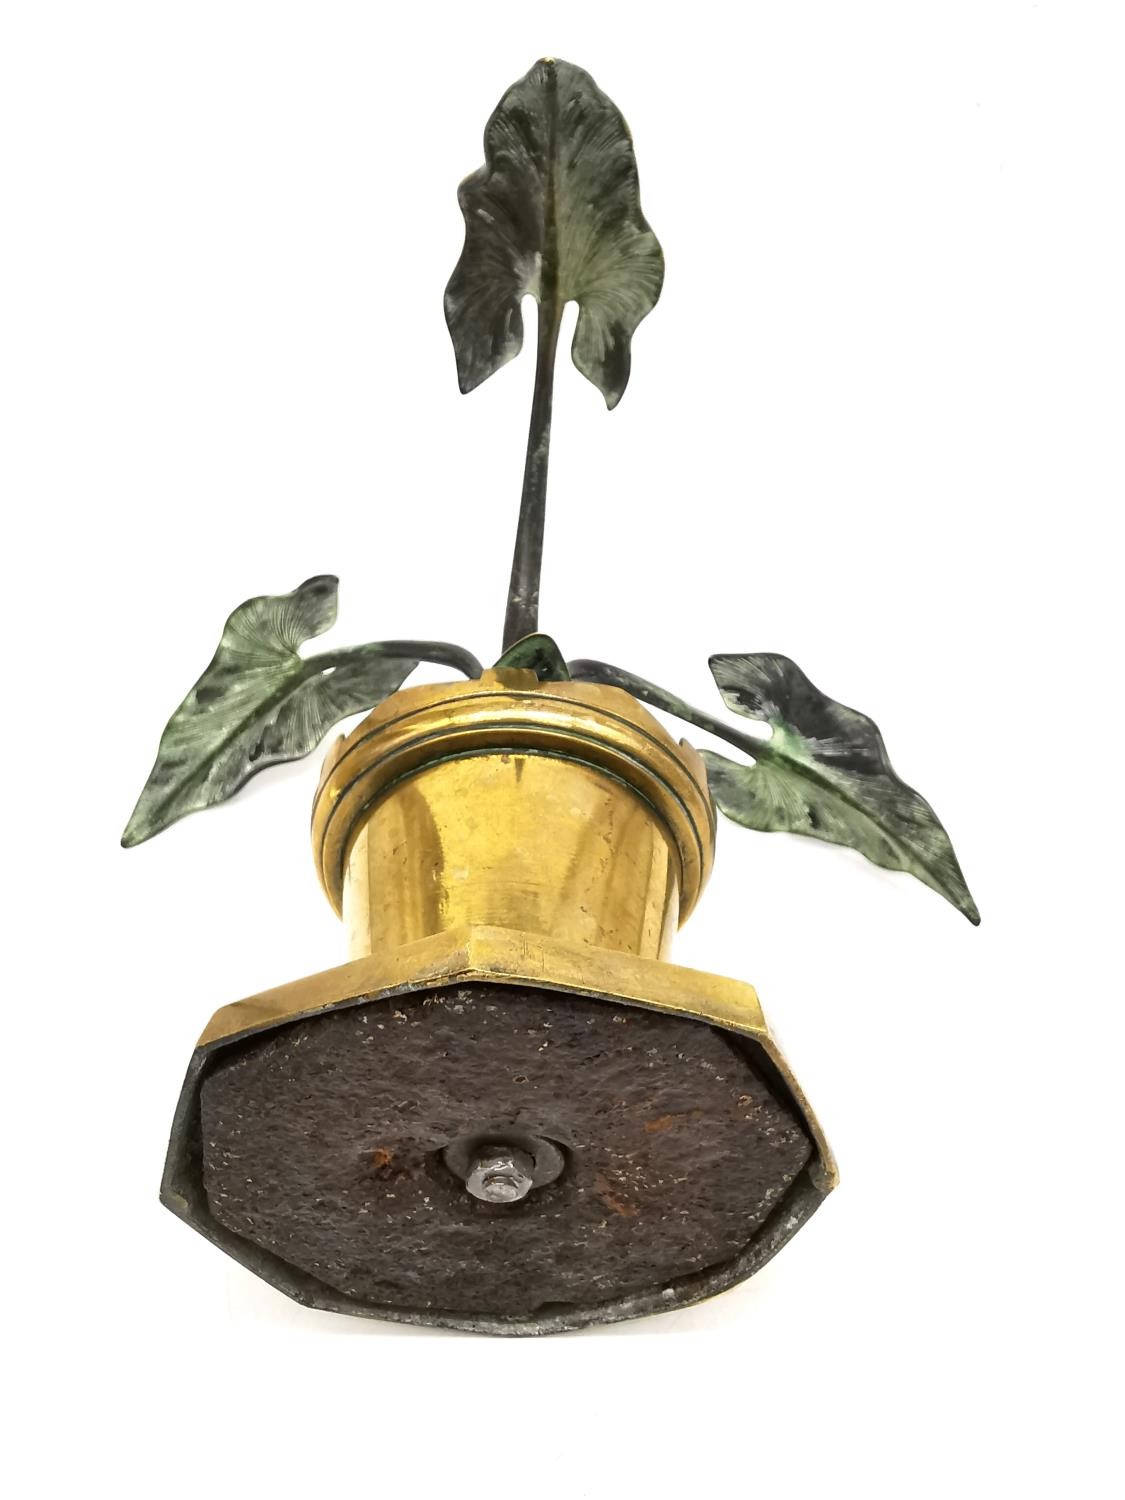 A brass trench art Alocasia plant in a pot made from a brass artillery shell along with a - Image 5 of 10